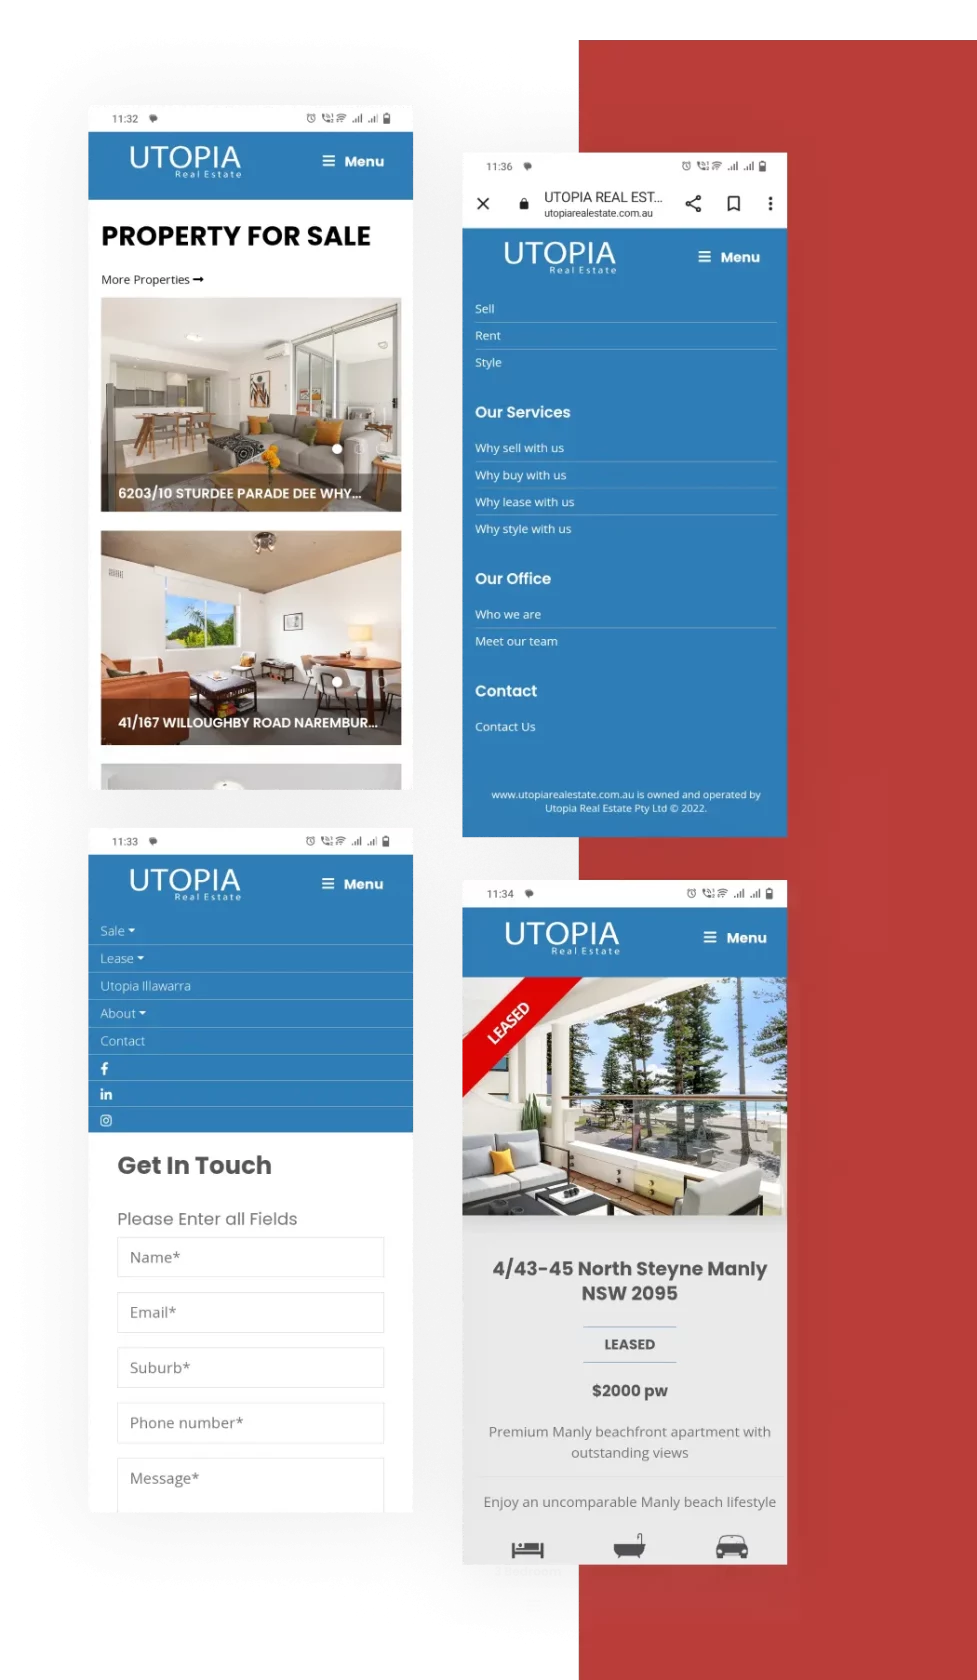 Responsive mobile display of web pages